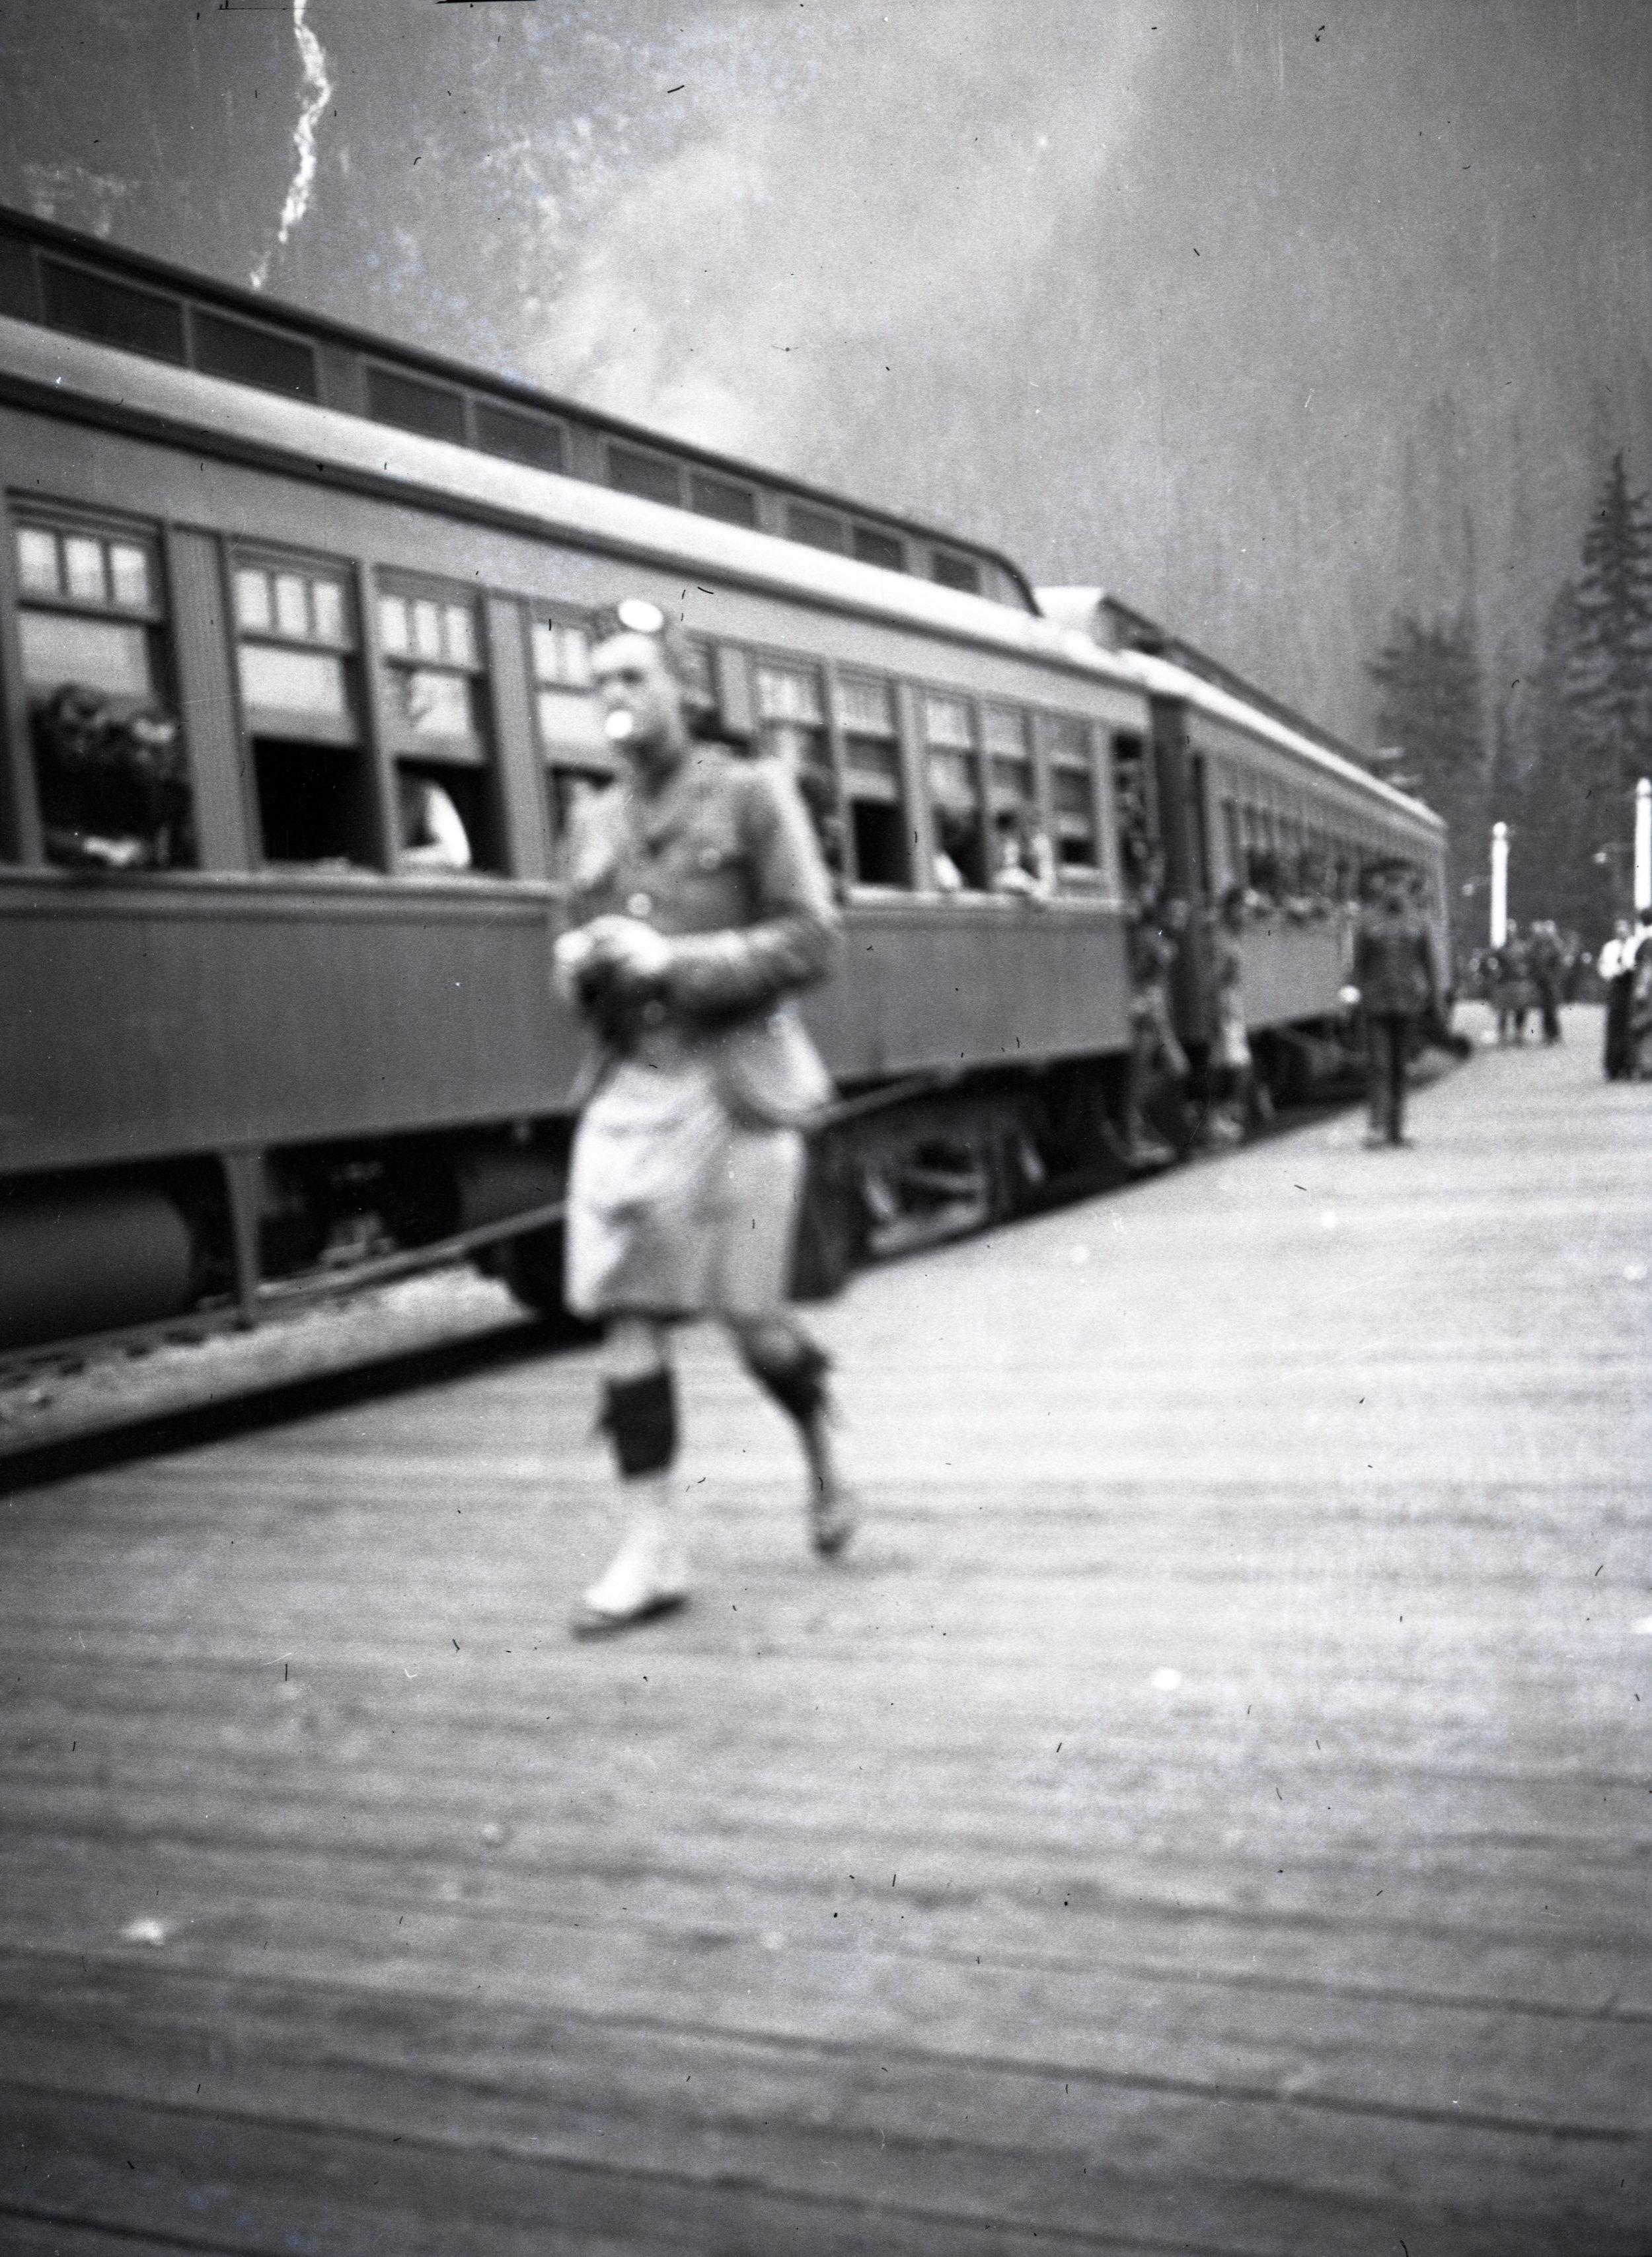  In the first decades of the 20th century, highways were still very new. Most long distance travel was done by train.  